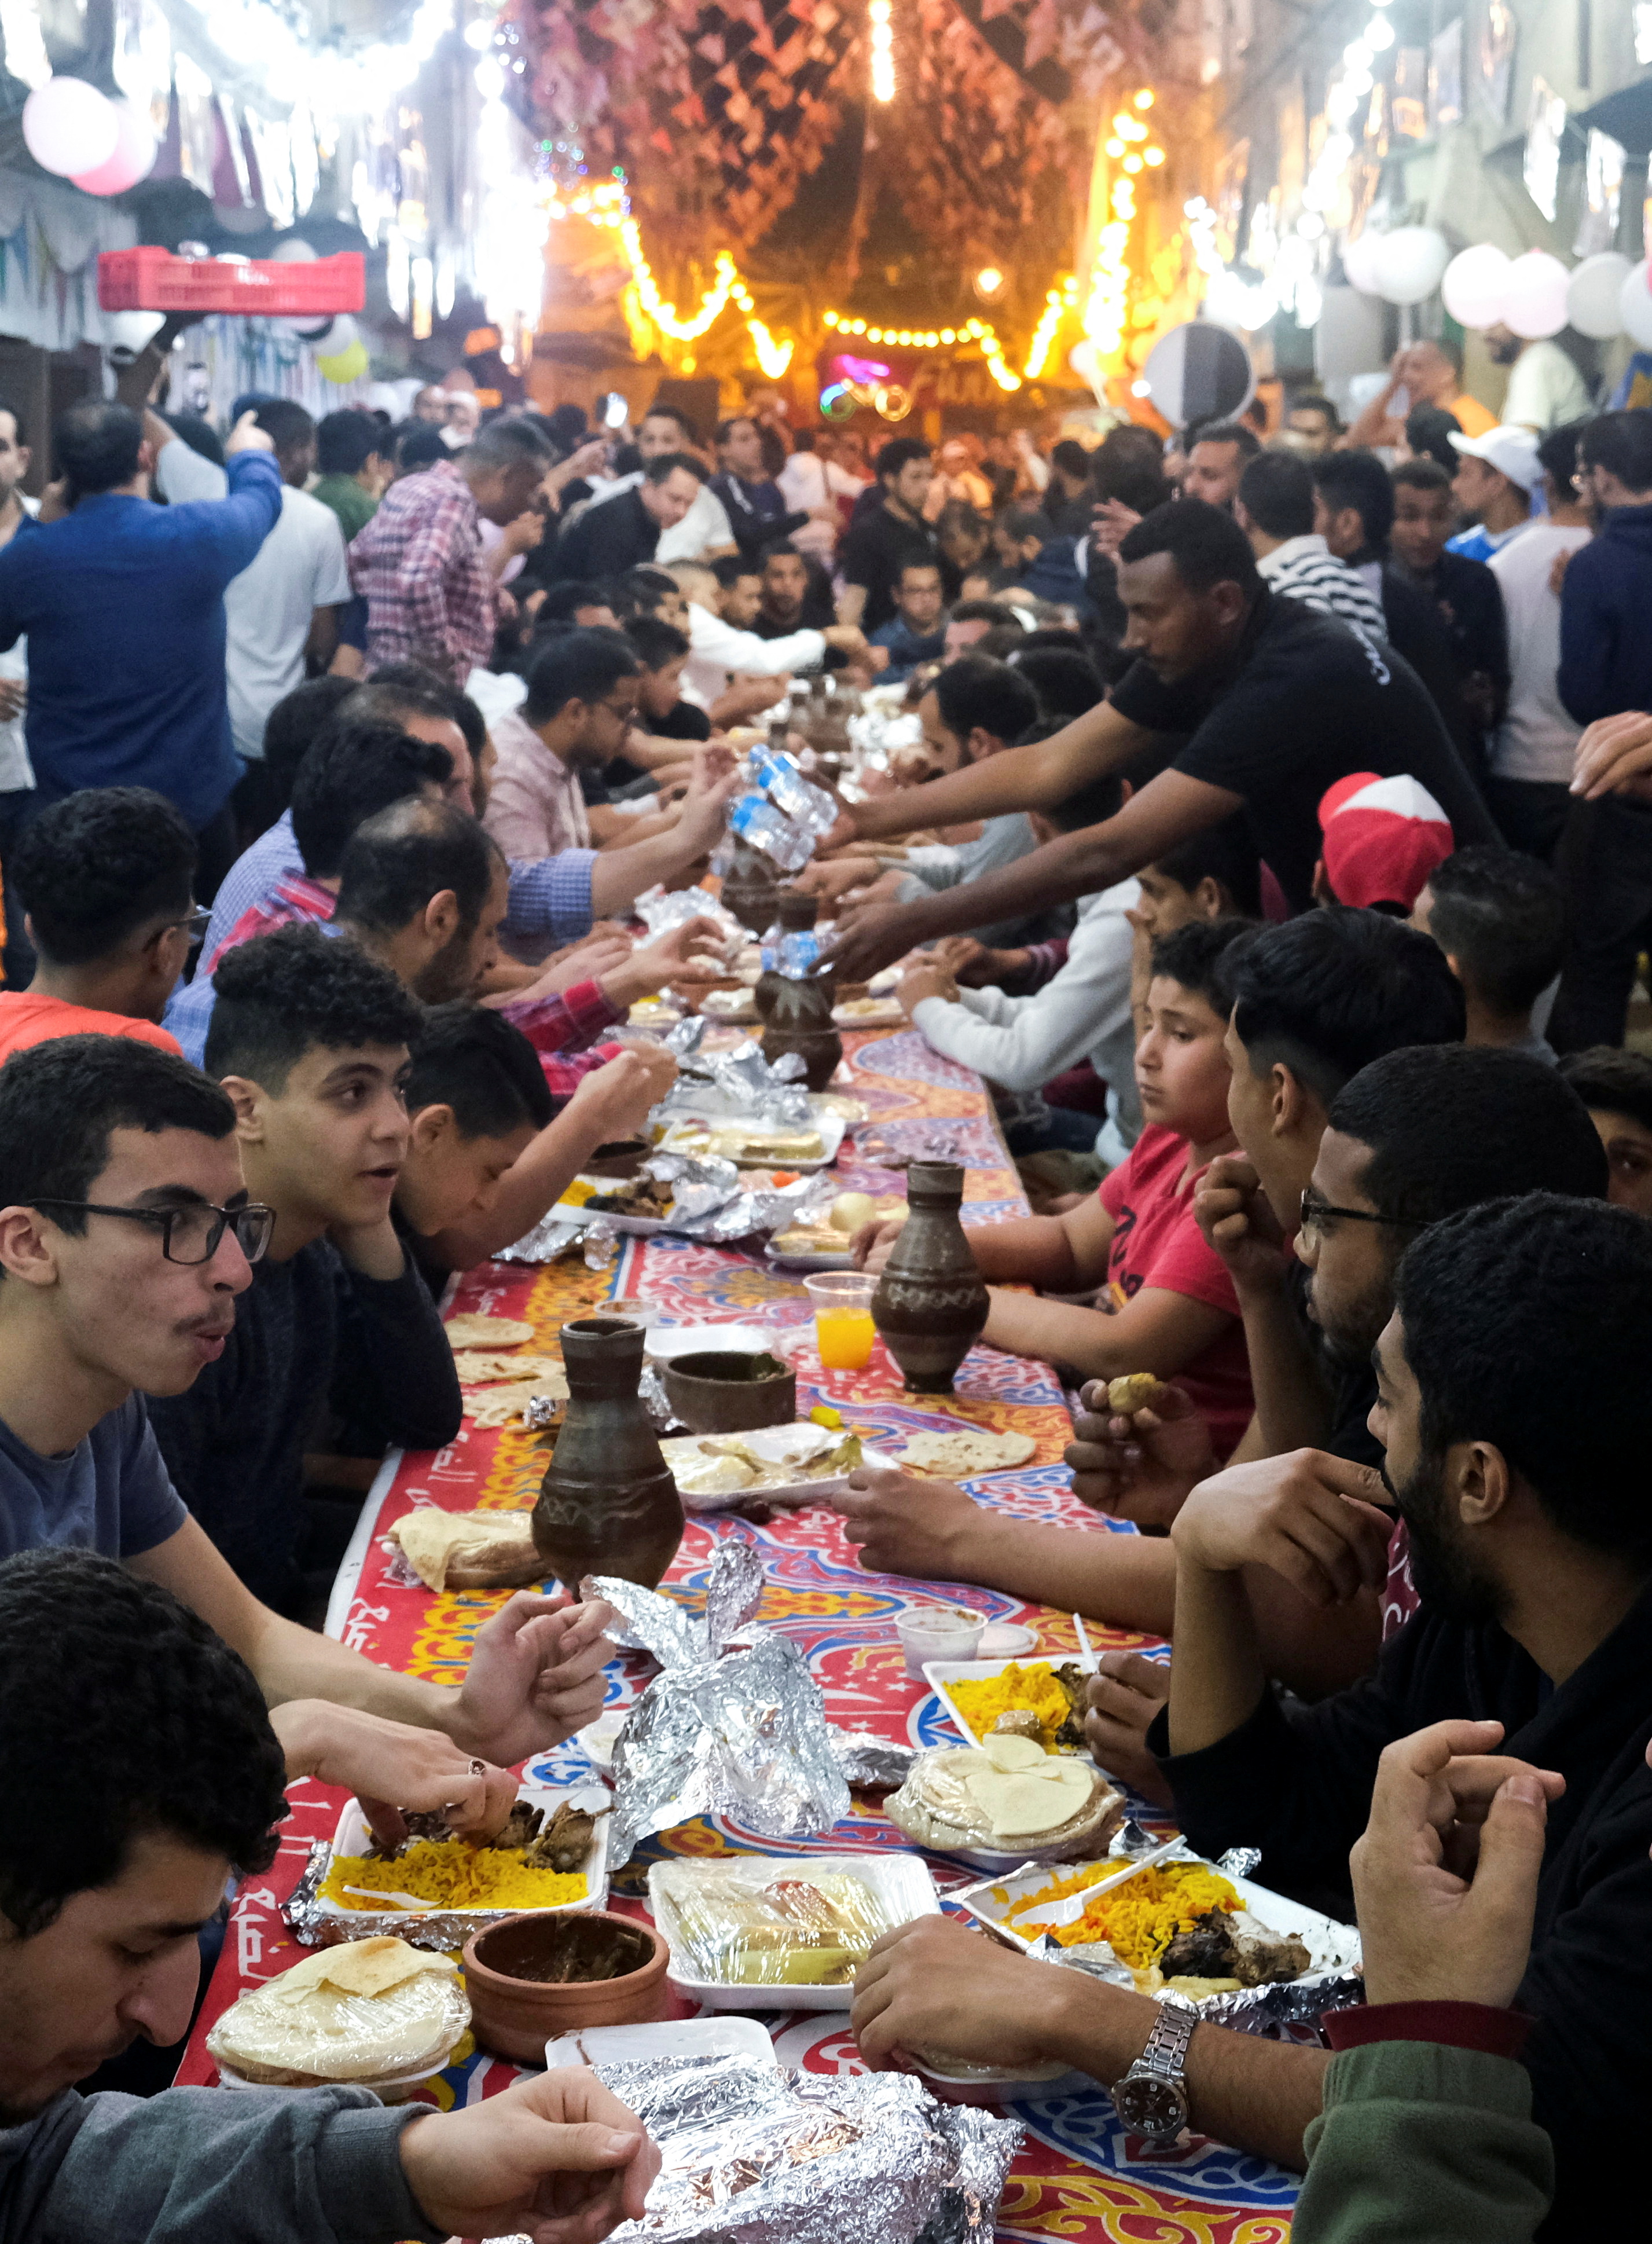 Communal meals have returned to Egypt's streets after being widely suspended for the past two years due to Covid-19 restrictions.